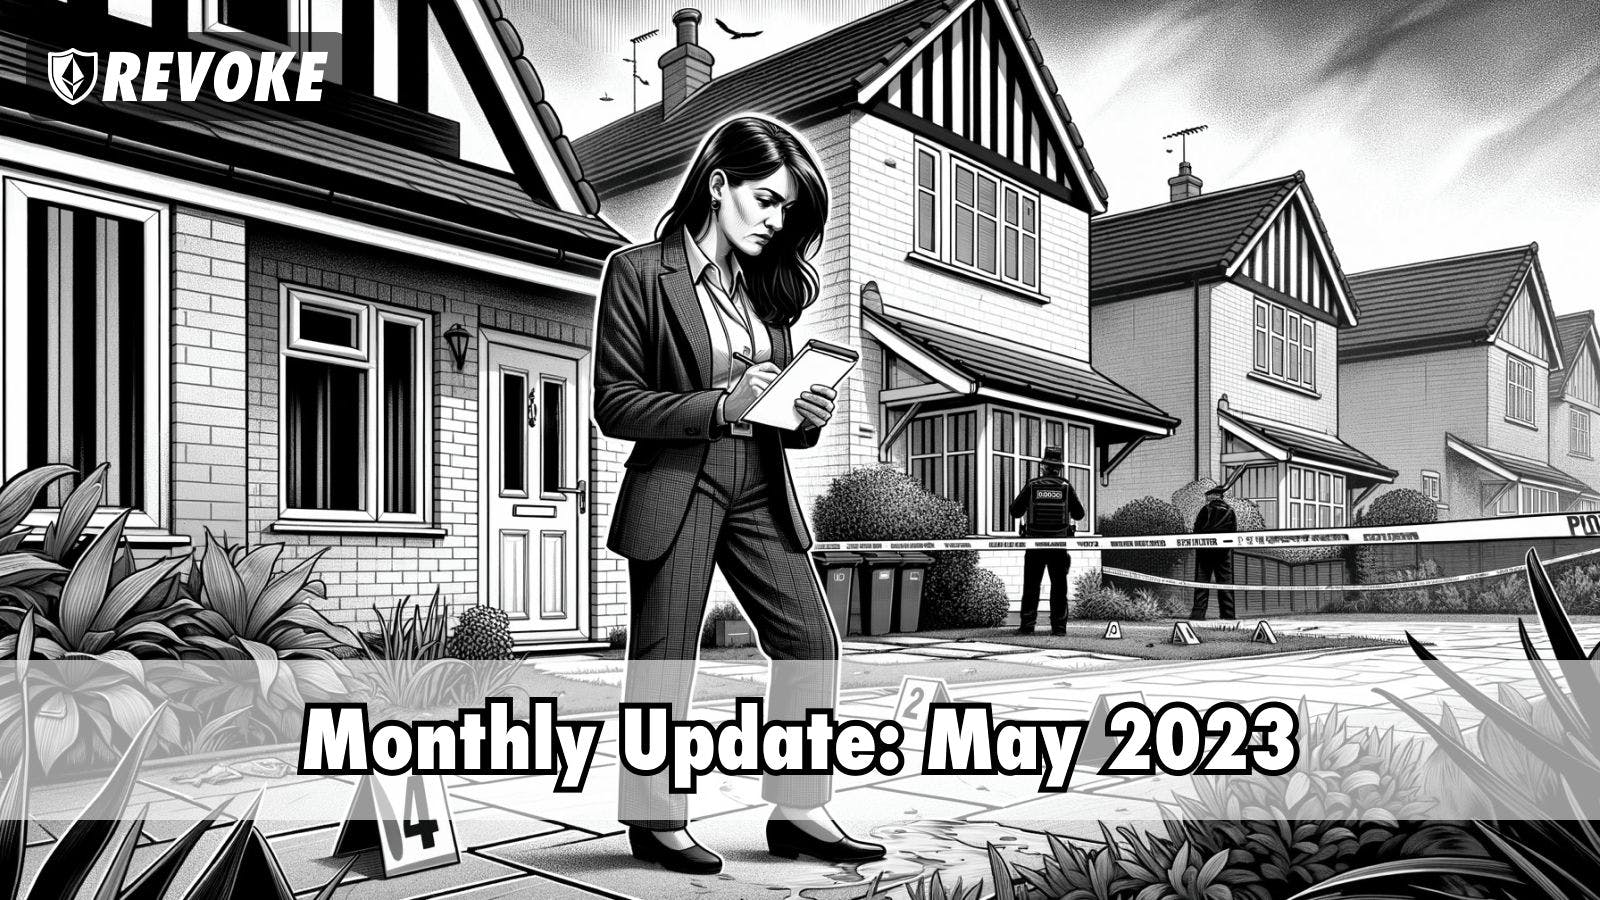 Monthly Update: May 2023